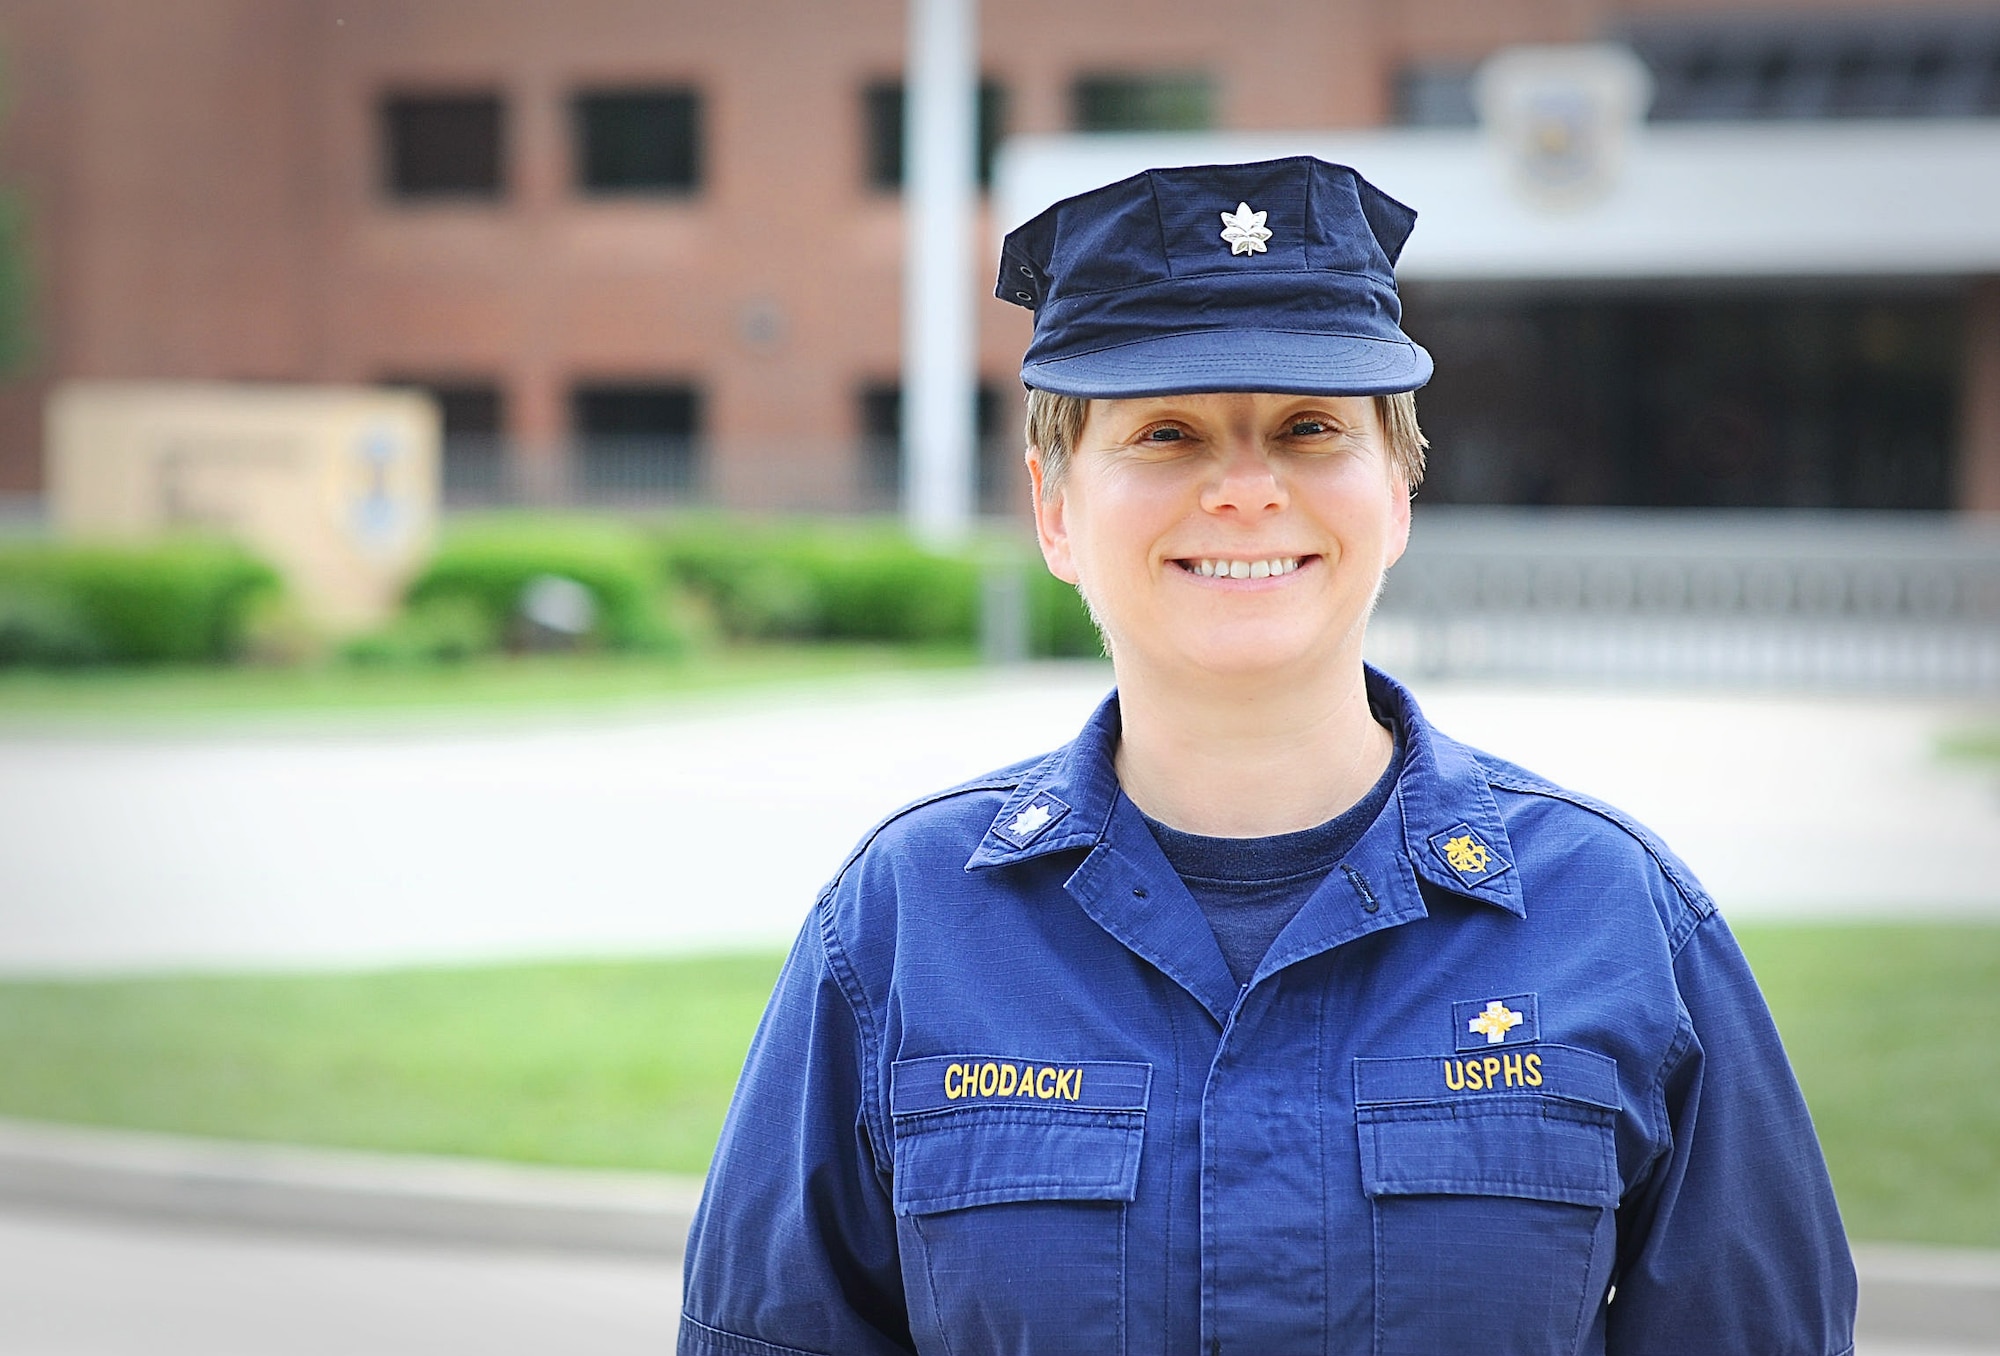 U.S. Public Health Service Cmdr. Julie Chodacki has deployed six times to assist with humanitarian crisis or national disasters and helps people with emotional and mental wellness as they go through the recovery process. She’s assigned to Air Mobility Command’s Surgeon General office and is the installation’s Comprehensive Airman Fitness chief.